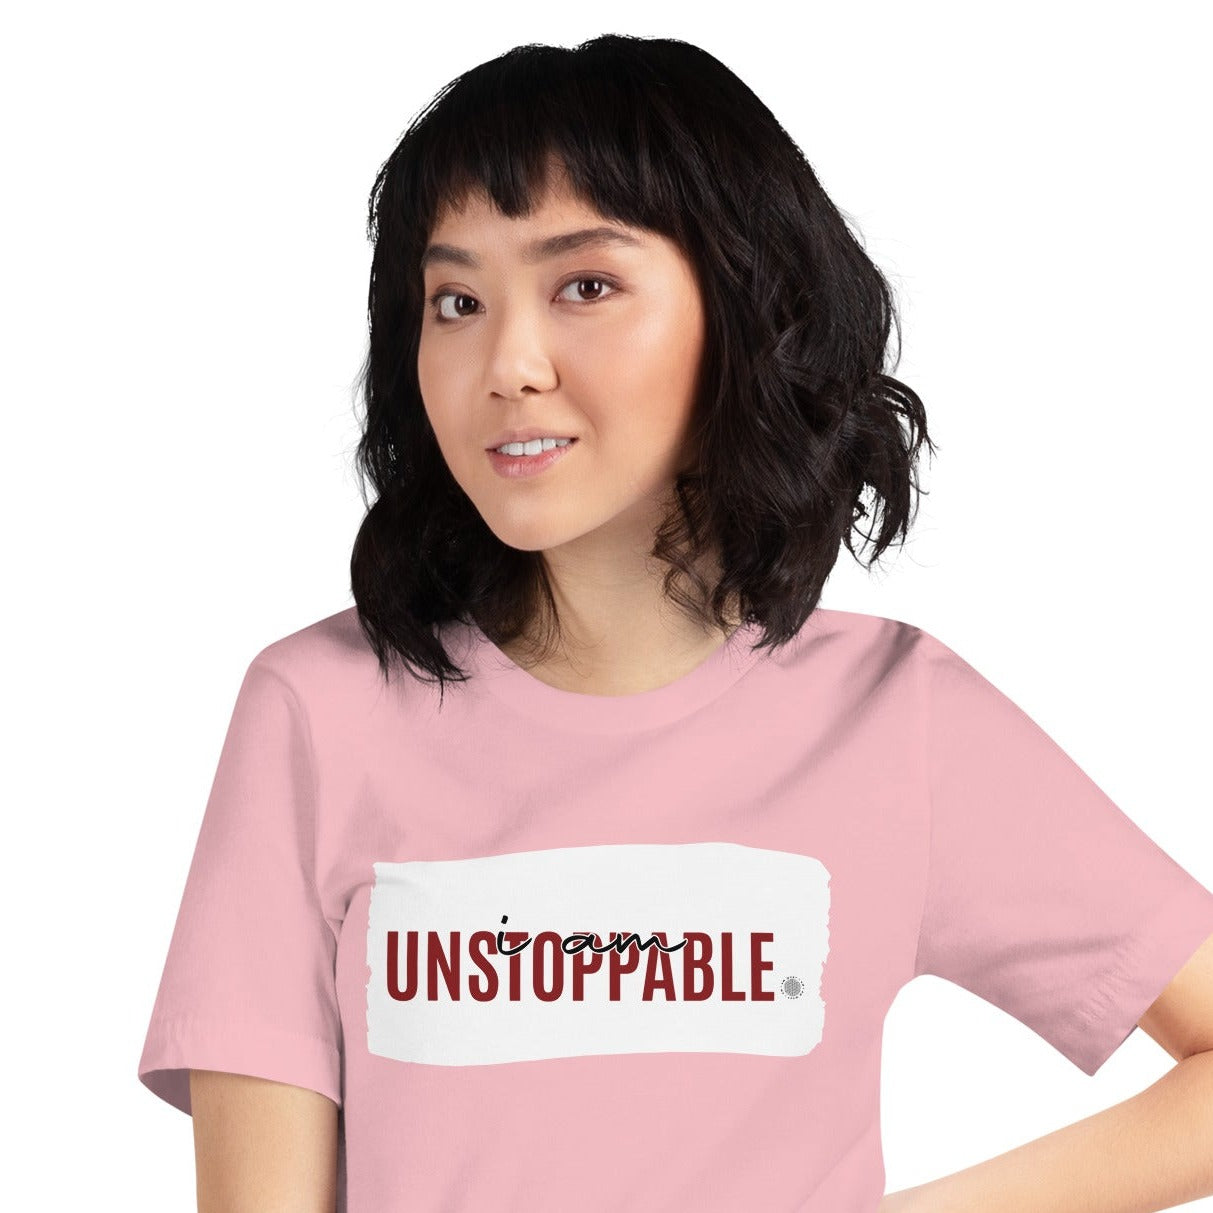 I Am Unstoppable Adult Unisex T-Shirt pink